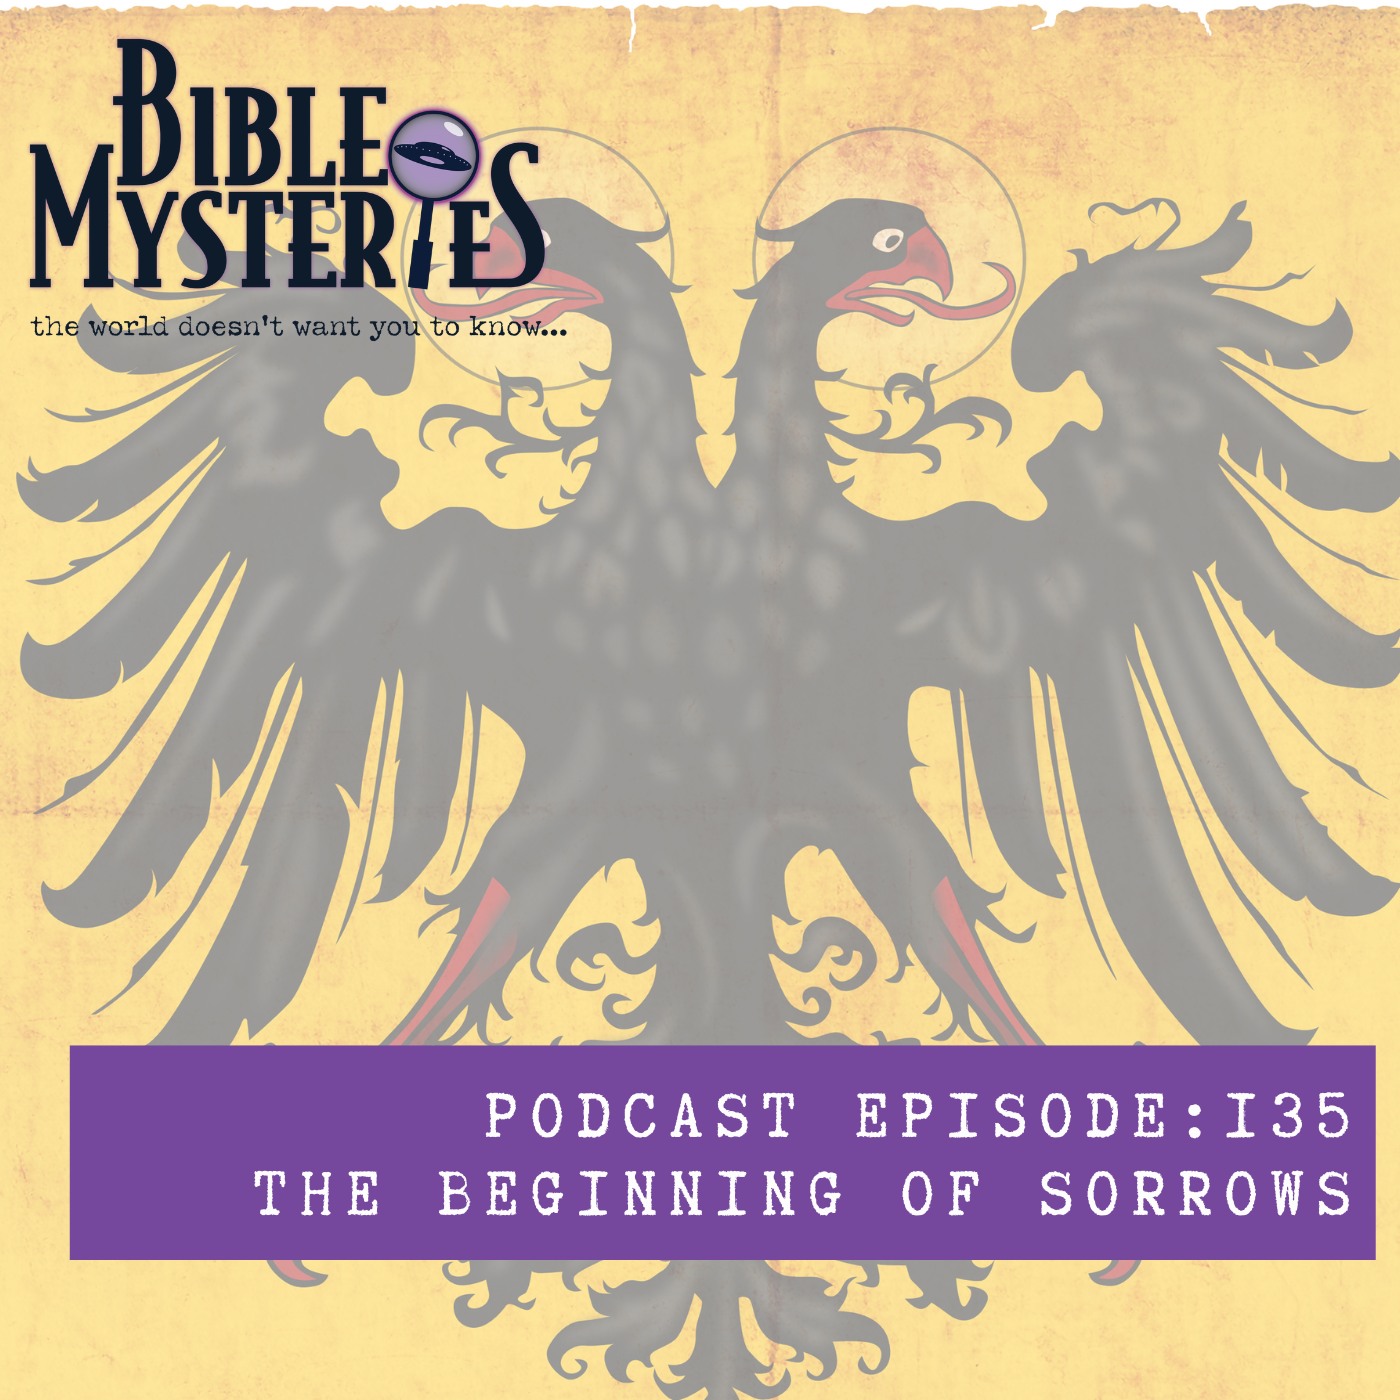 Artwork for podcast Bible Mysteries